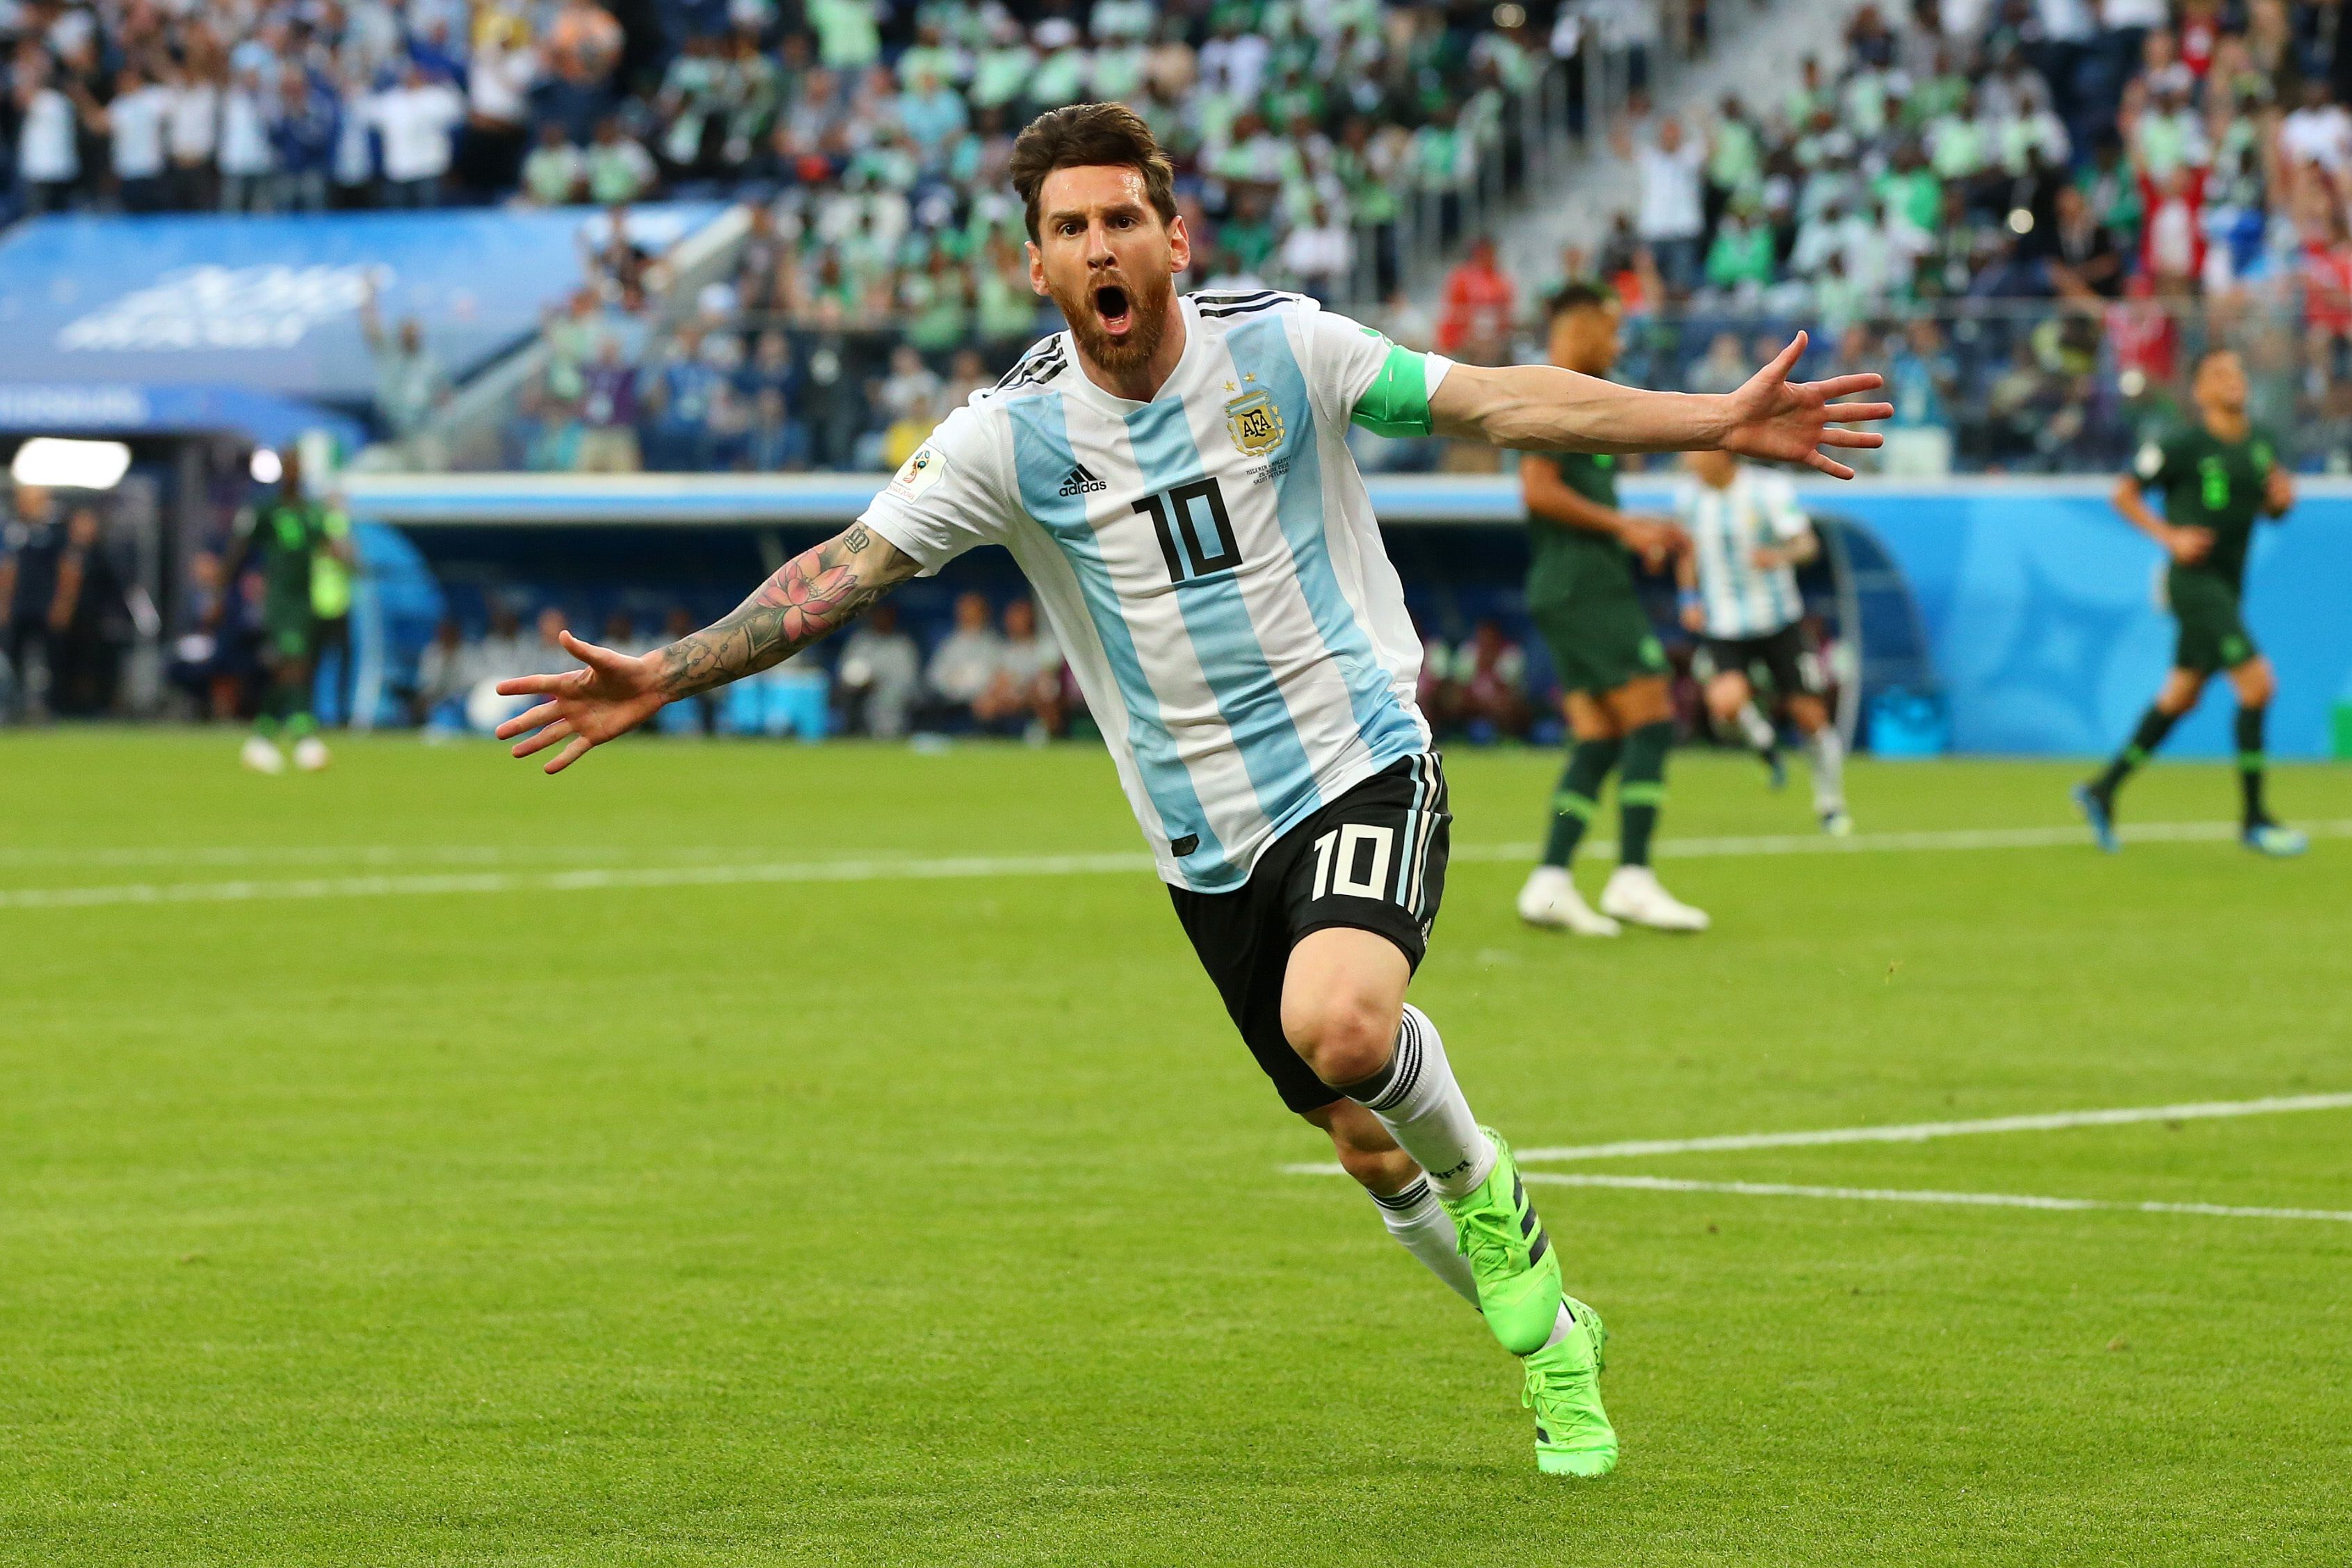 Lionel Messi In Fifa 2018 World Cup K #wallpaper #hdwallpaper #desktop. Lionel messi, Messi, Messi argentina